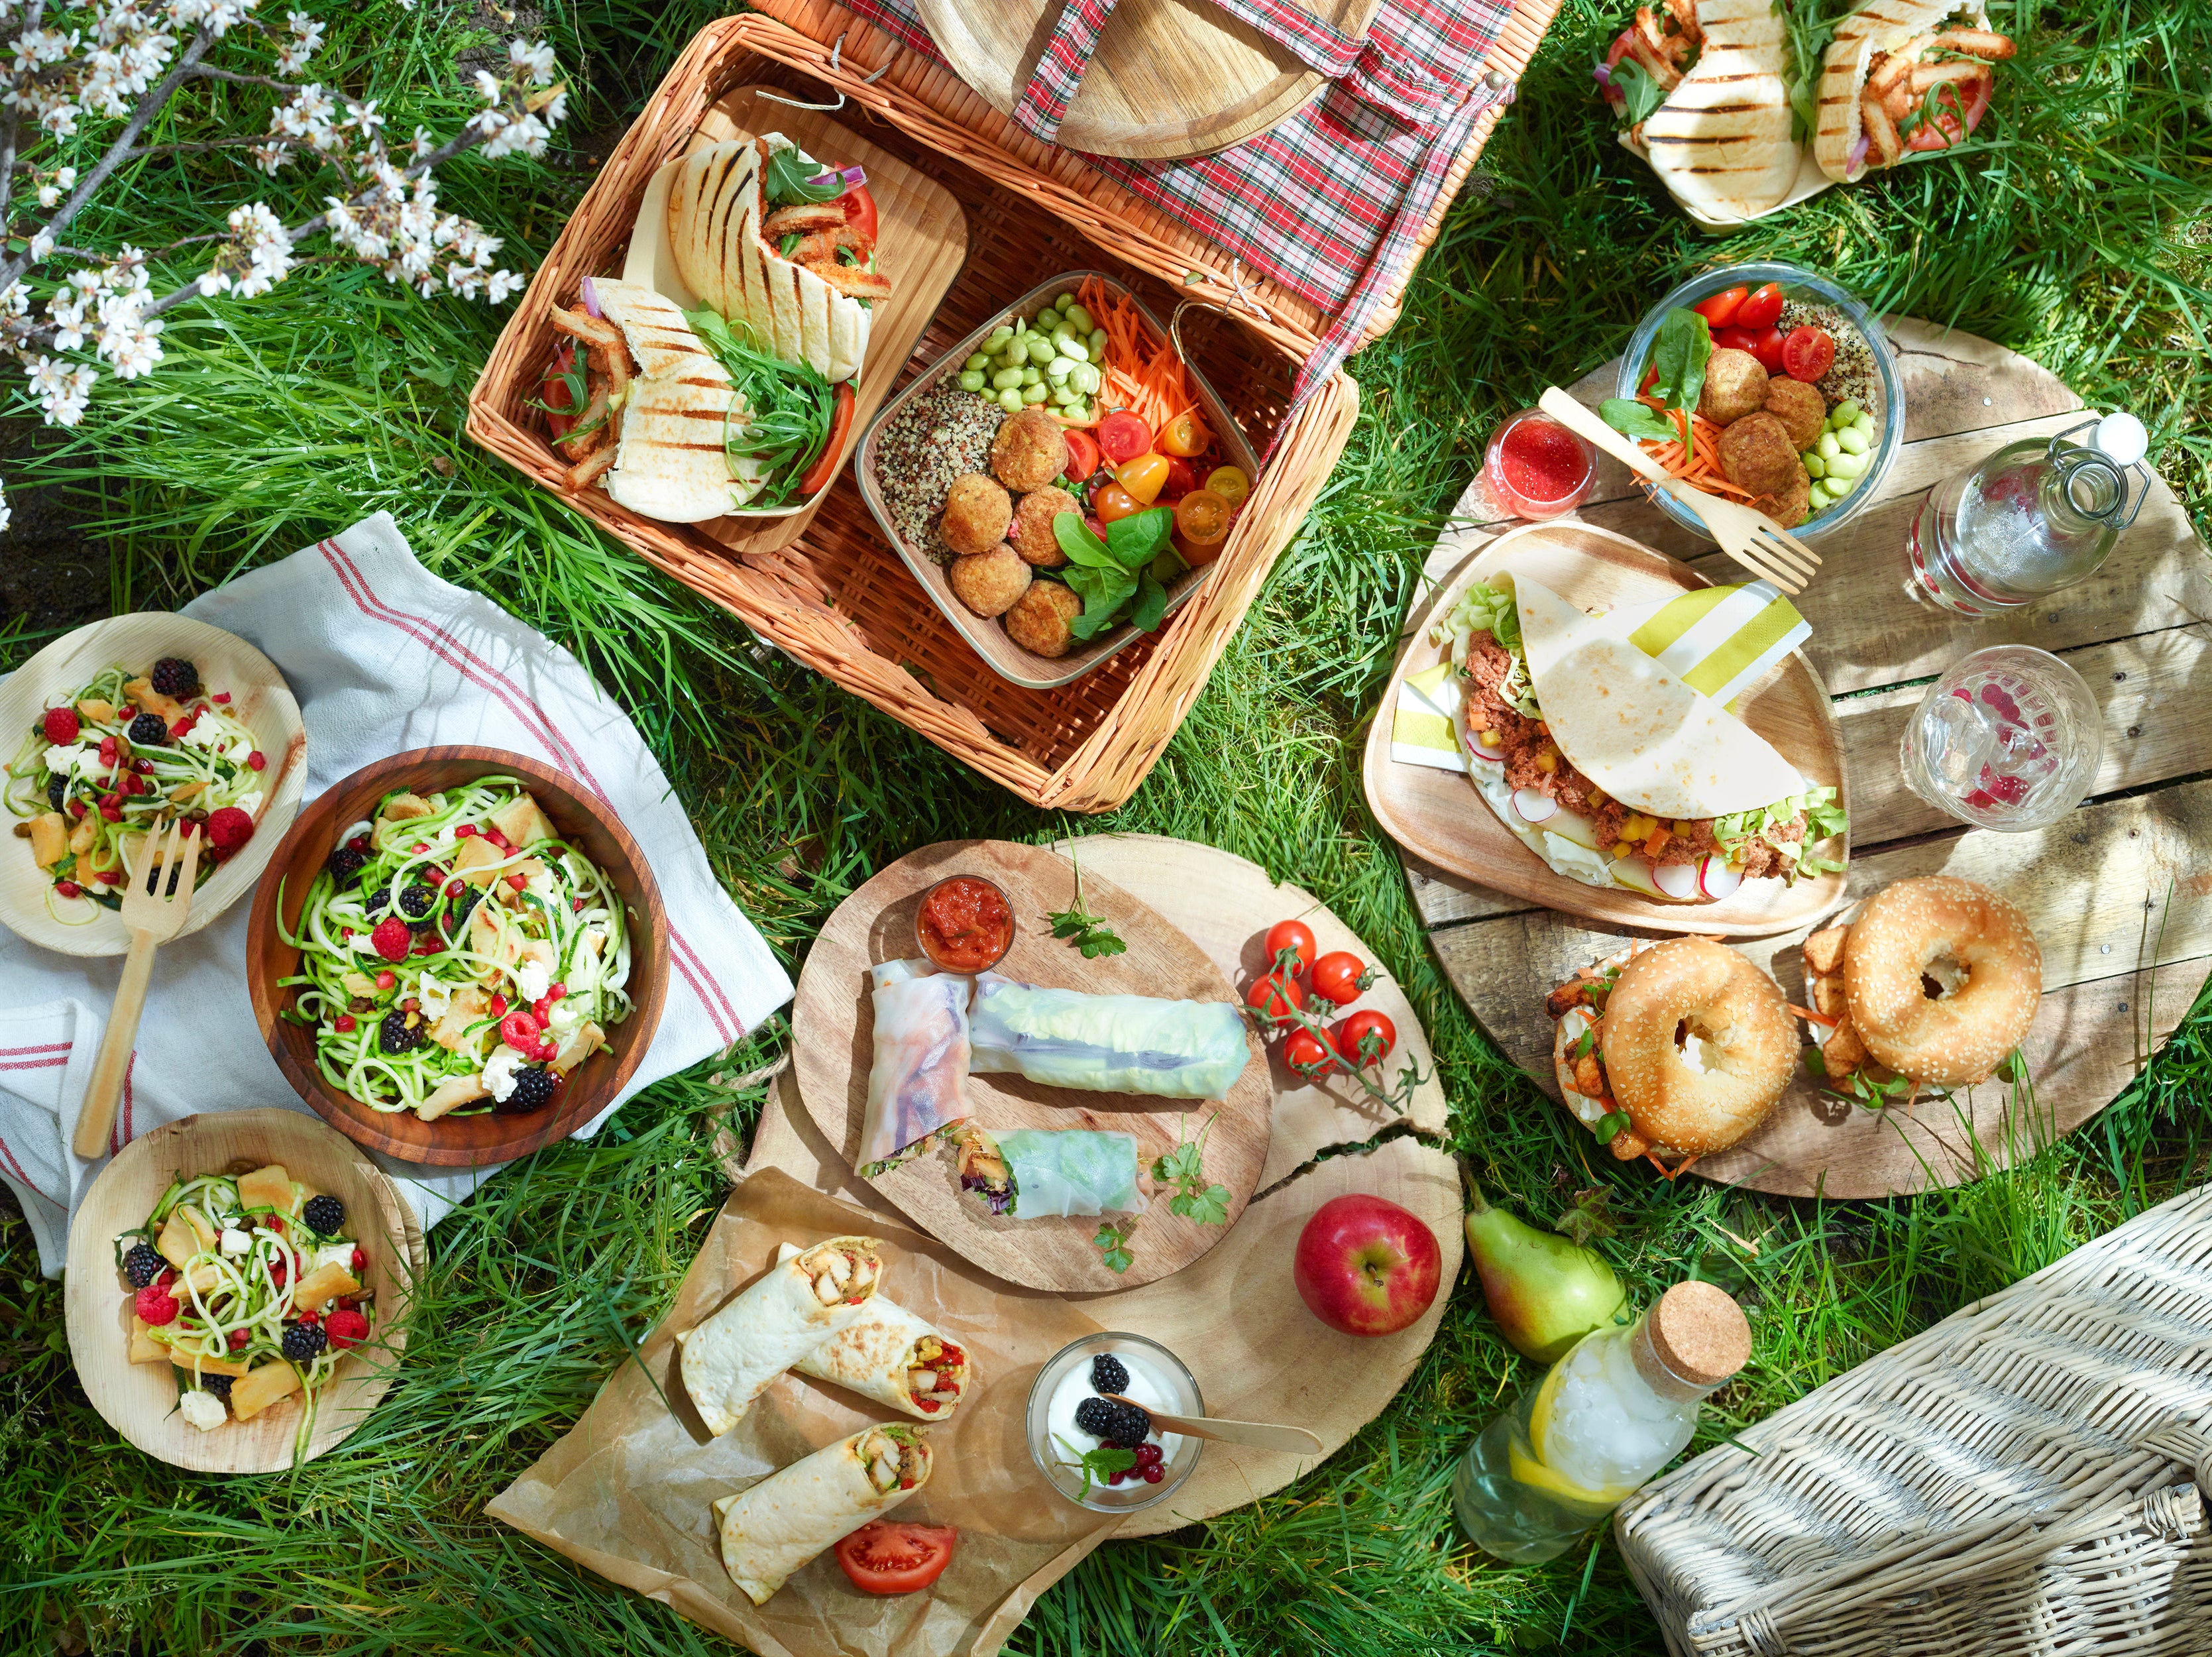 25 recipes that are perfect for your picnic basket